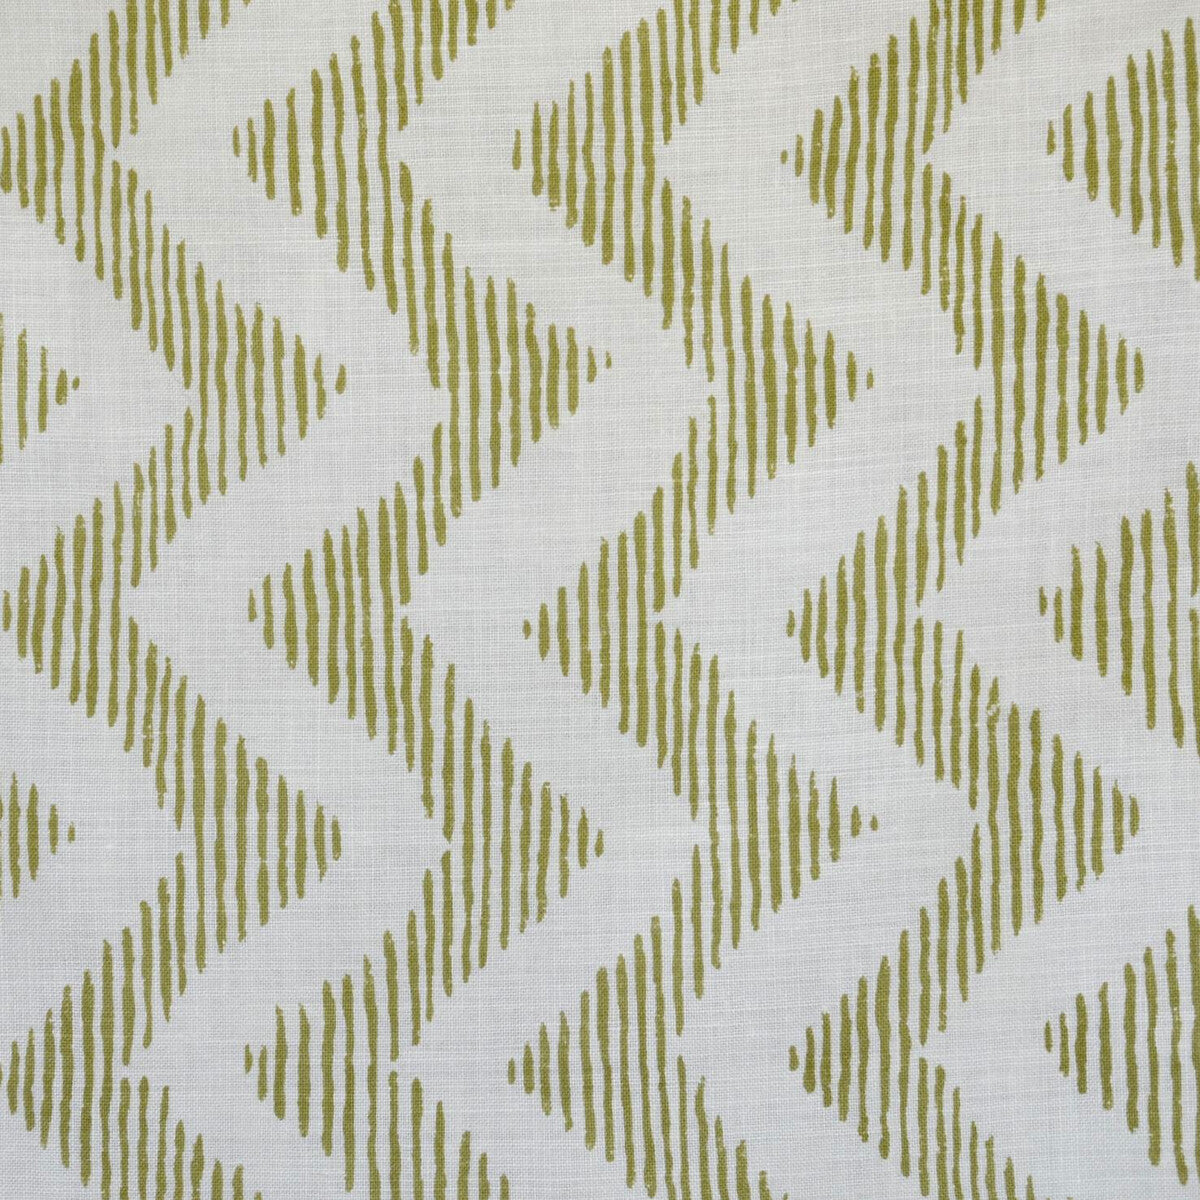 Colebrook fabric in green/oyster color - pattern BFC-3632.3.0 - by Lee Jofa in the Blithfield collection